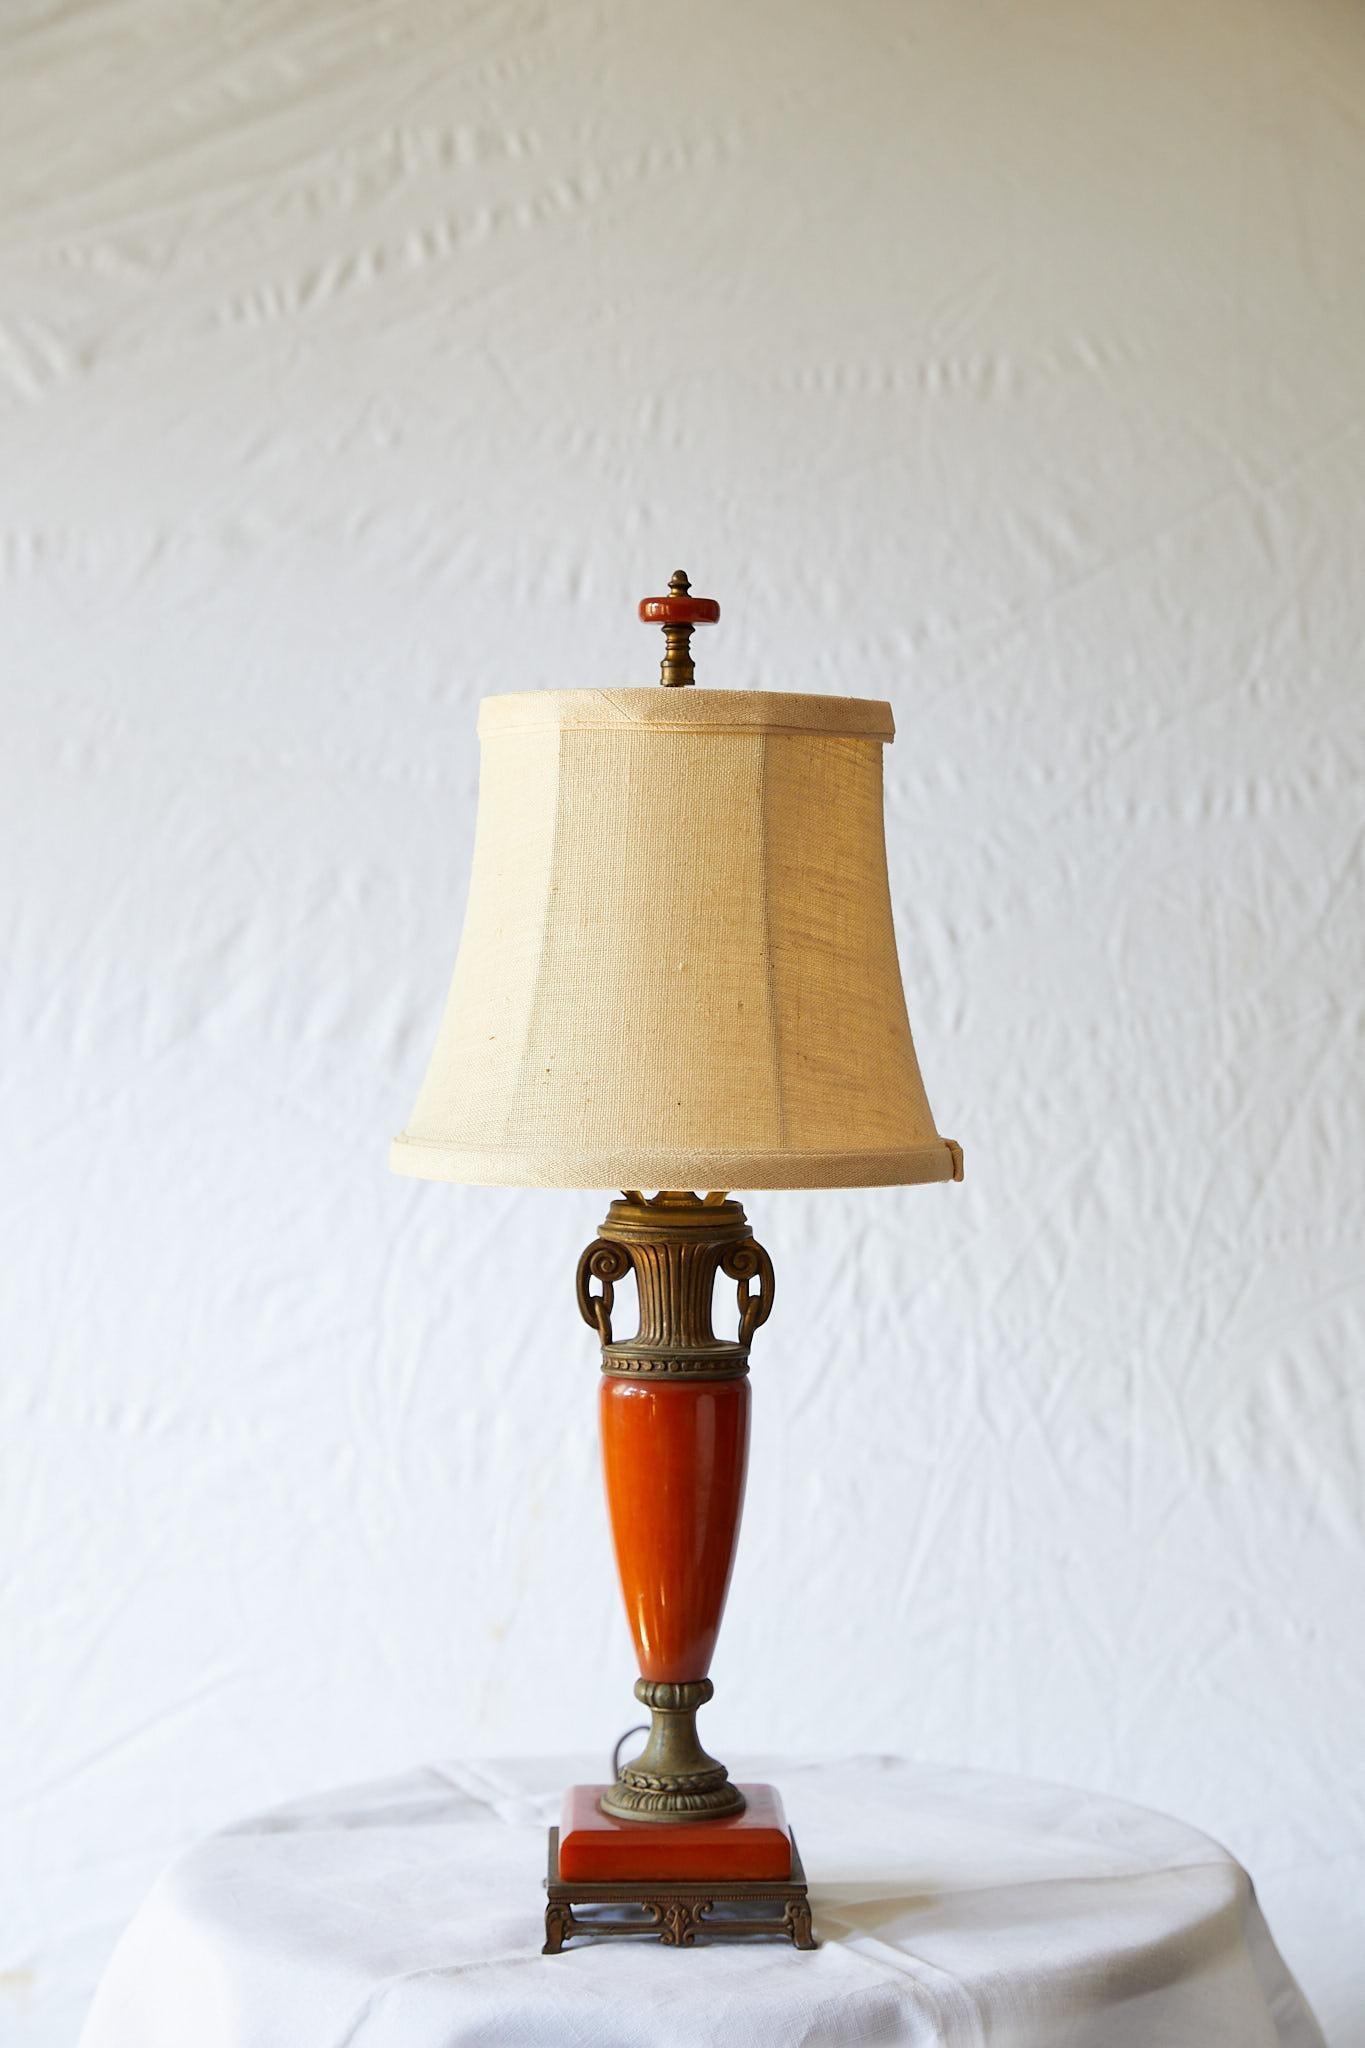 Early 20th century petite table lamp of the Art Deco period made of red orange Bakelite and in a slender urn-shaped neoclassical form.